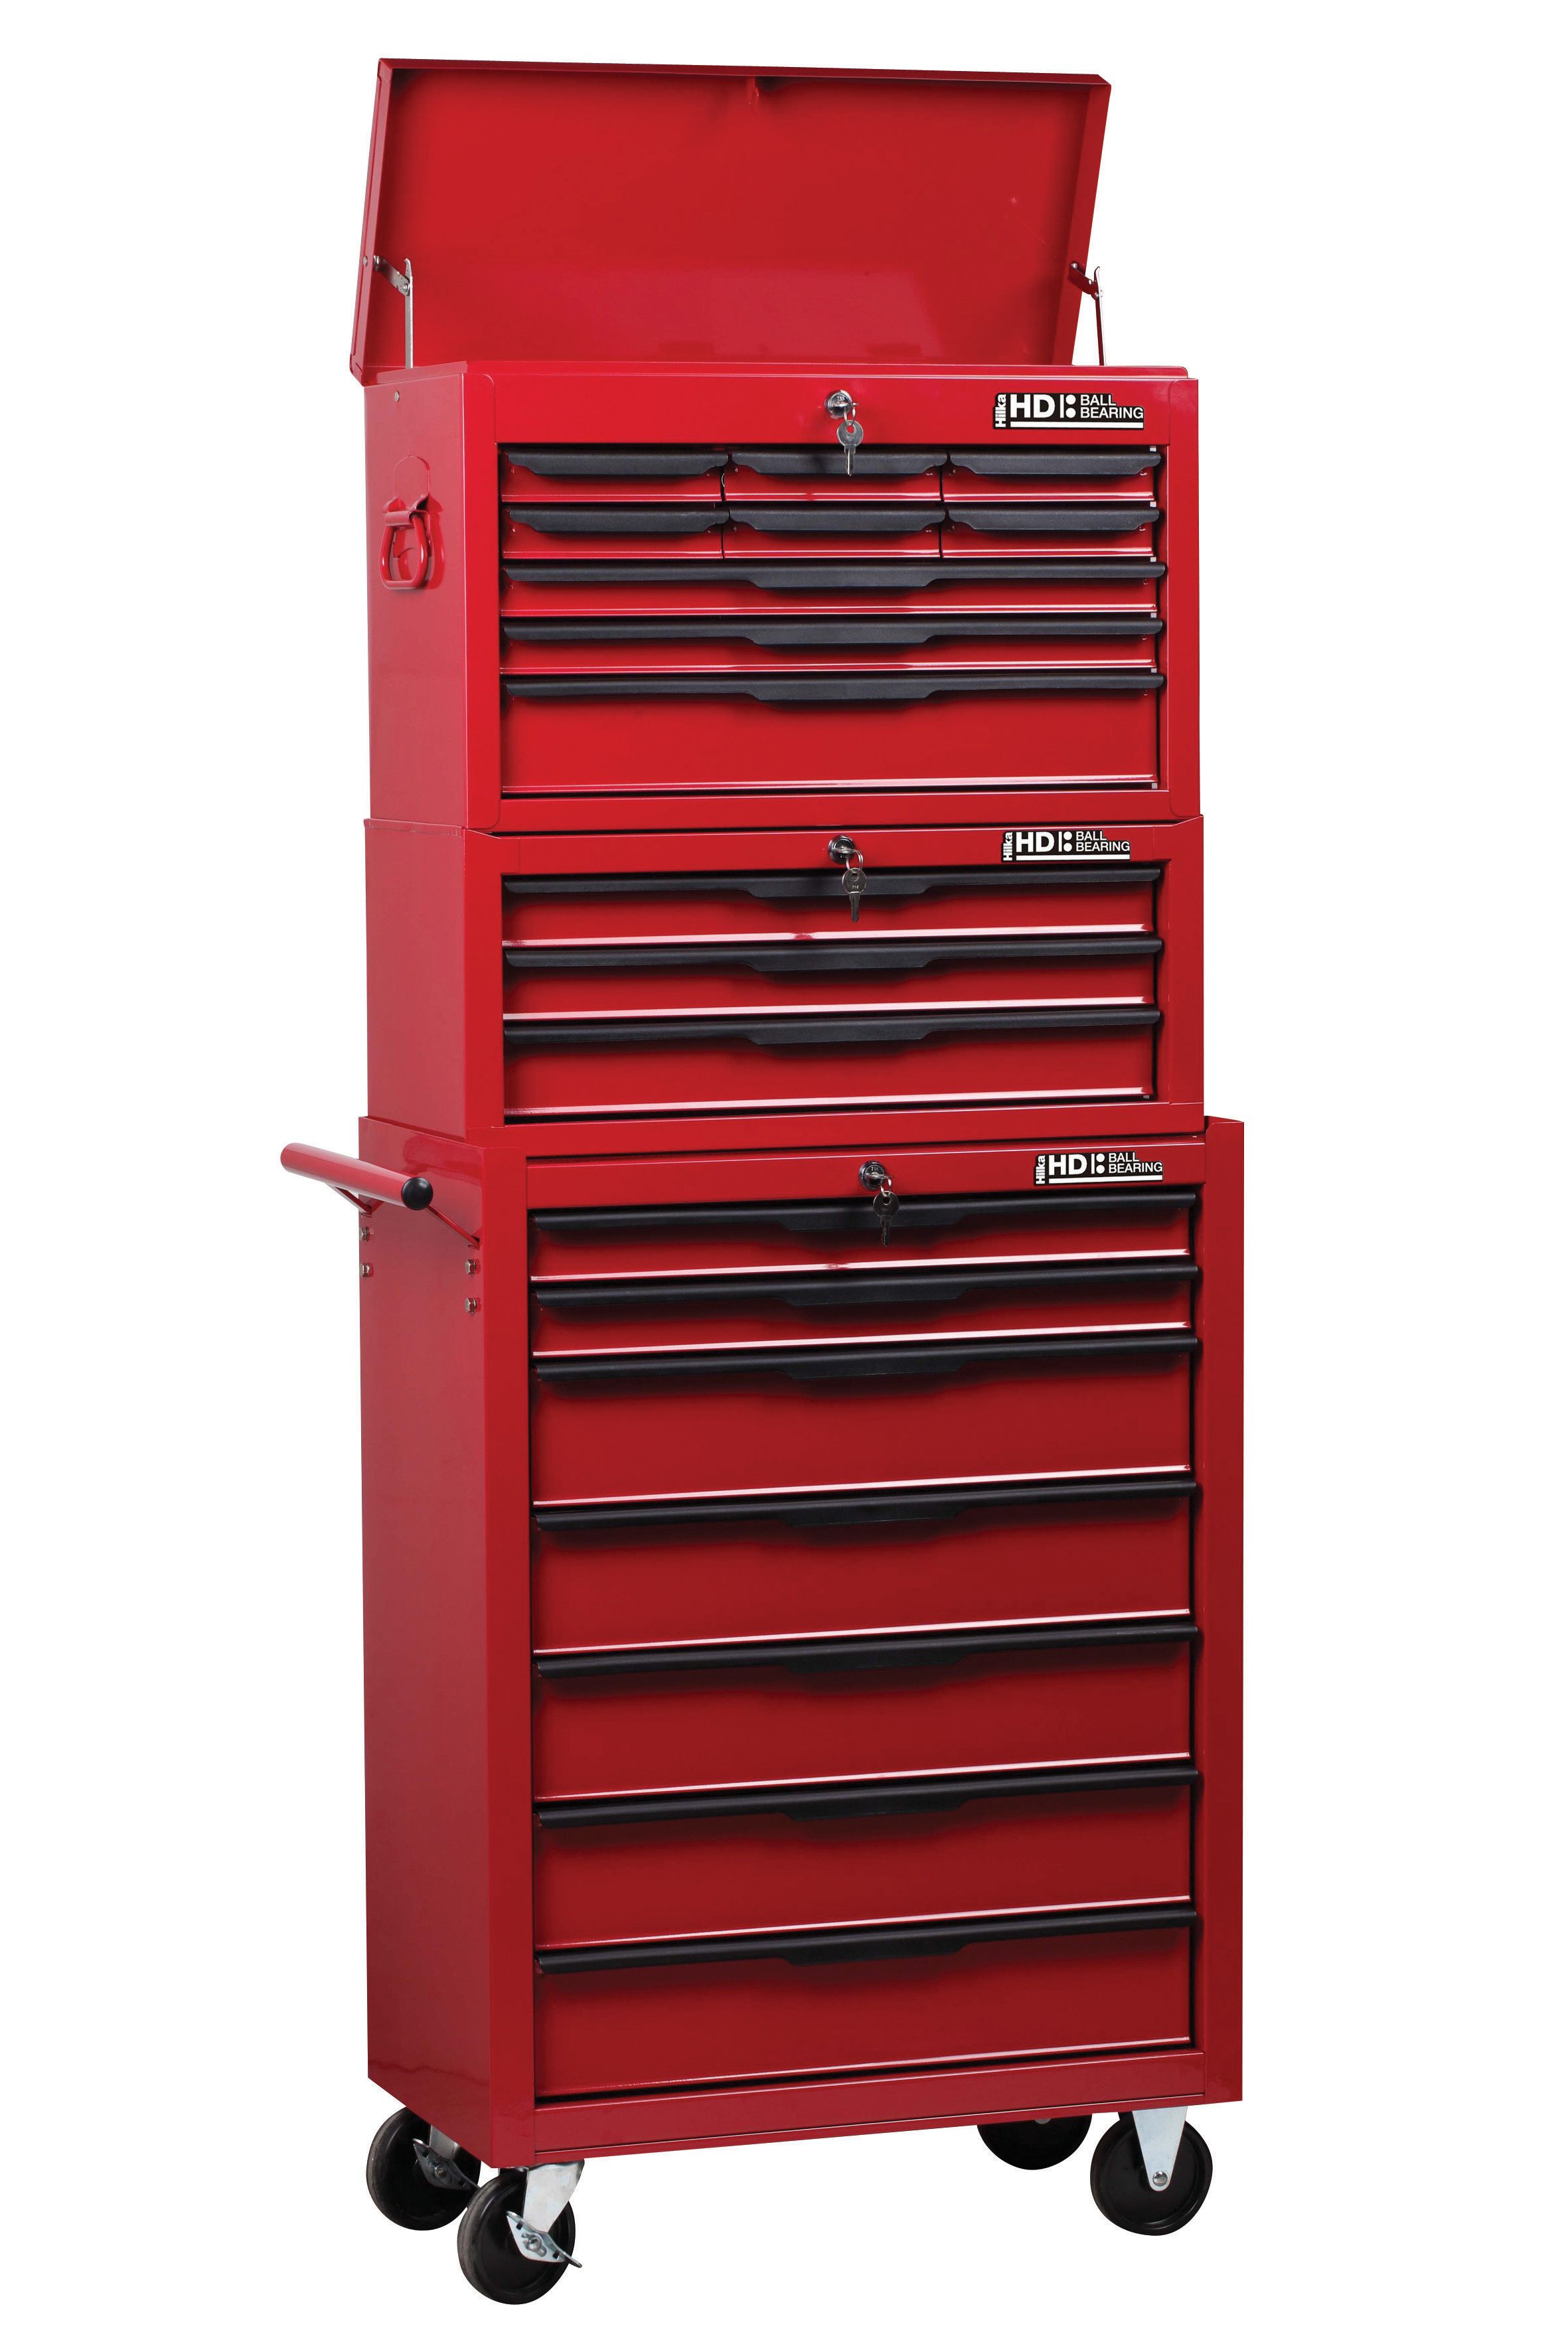 Hilka Heavy Duty 19 Drawer Mobile Combination Unit - Red